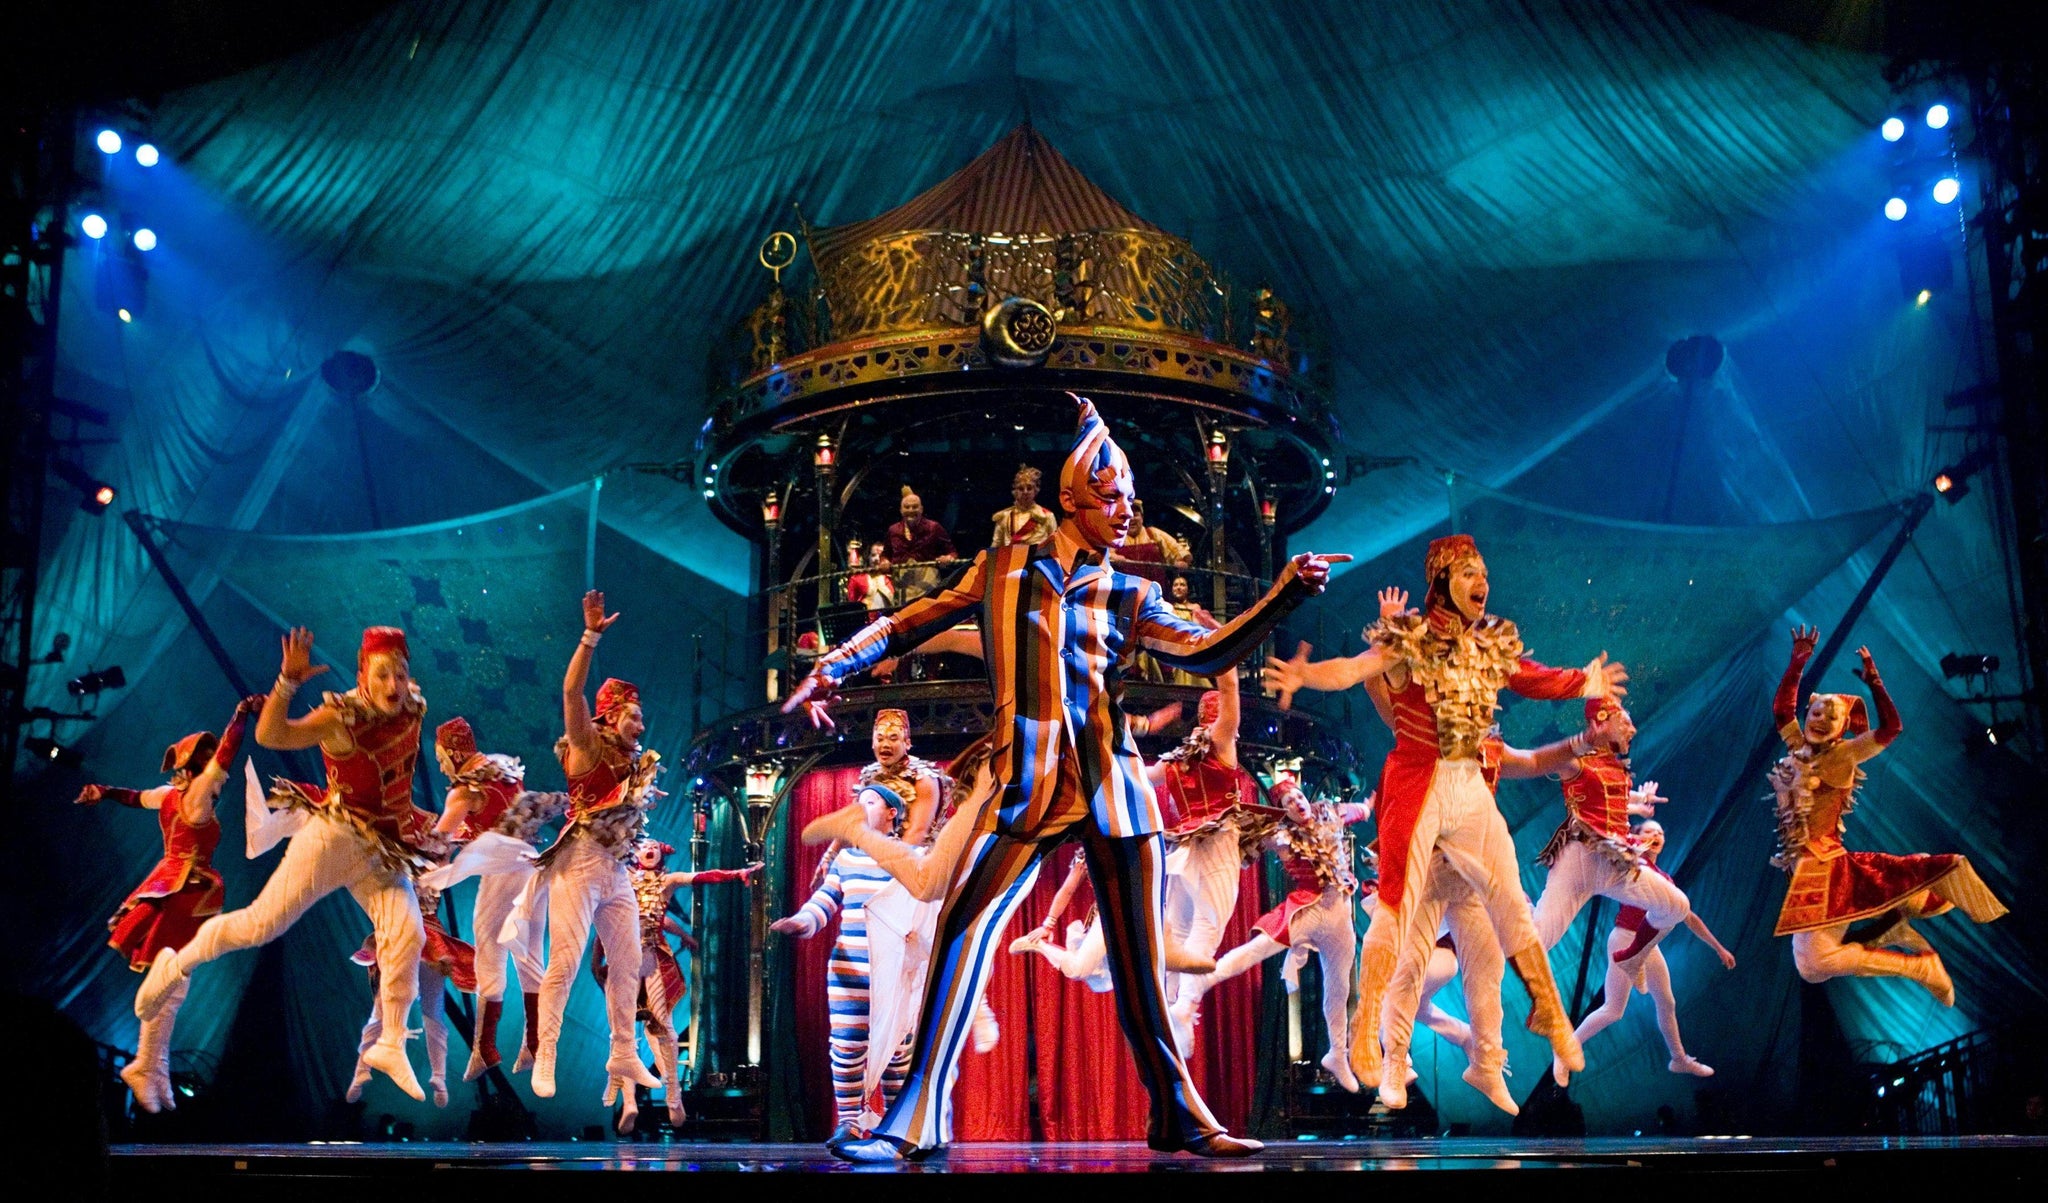 Here's How To Watch Cirque du Soleil Performances Online For Free